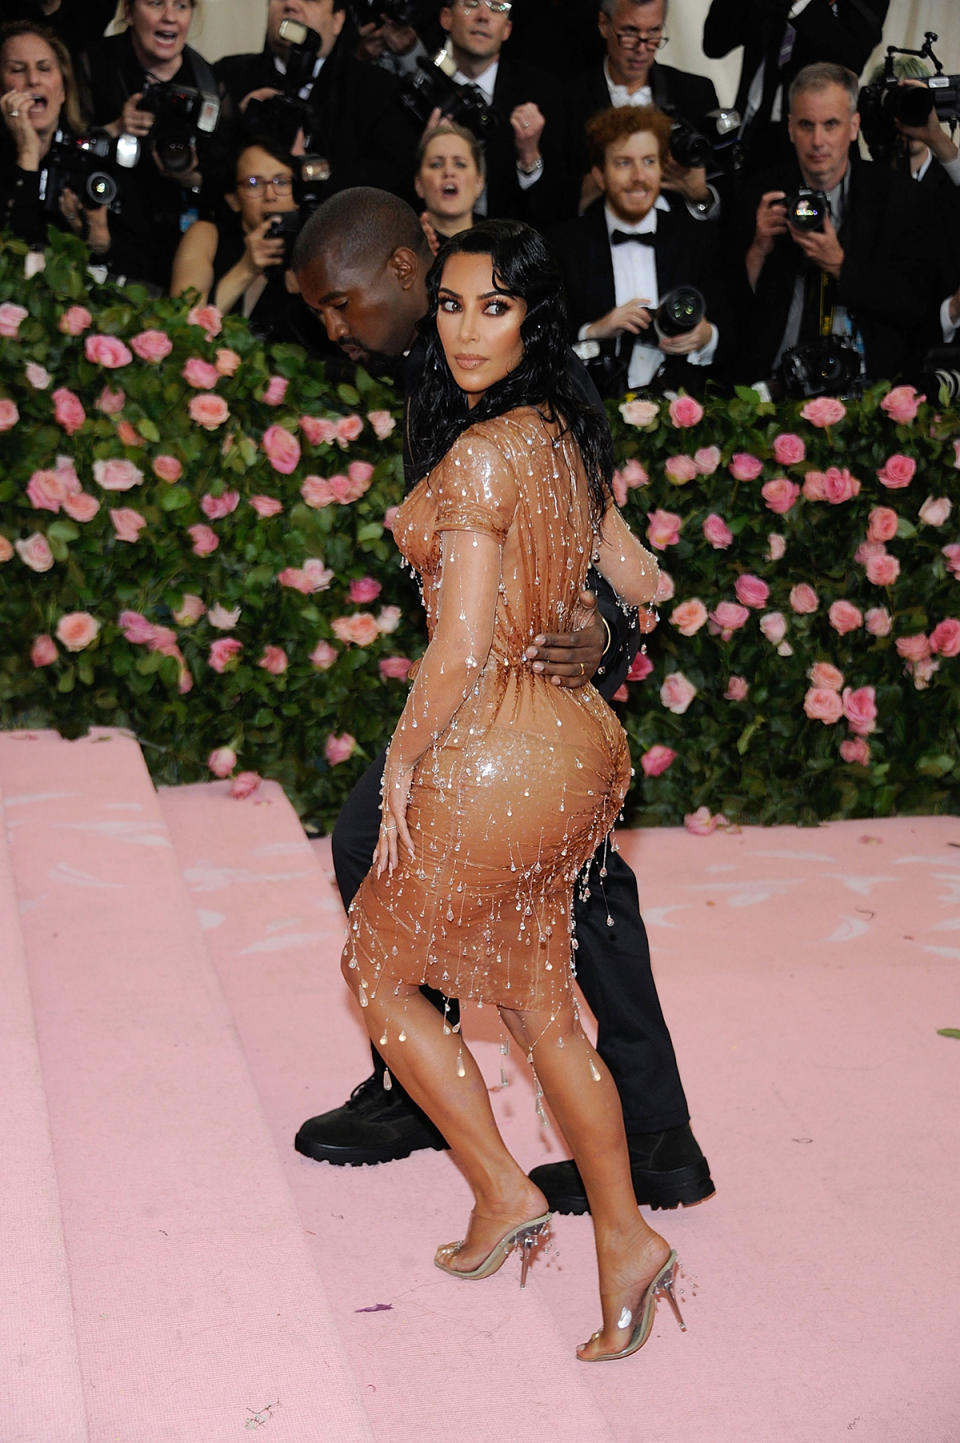 NEW YORK, NY - MAY 06:  Kim Kardashian West attends The 2019 Met Gala Celebrating Camp: Notes On Fashion - Arrivalsat The Metropolitan Museum of Art on May 6, 2019 in New York City.  (Photo by Rabbani and Solimene Photography/WireImage)